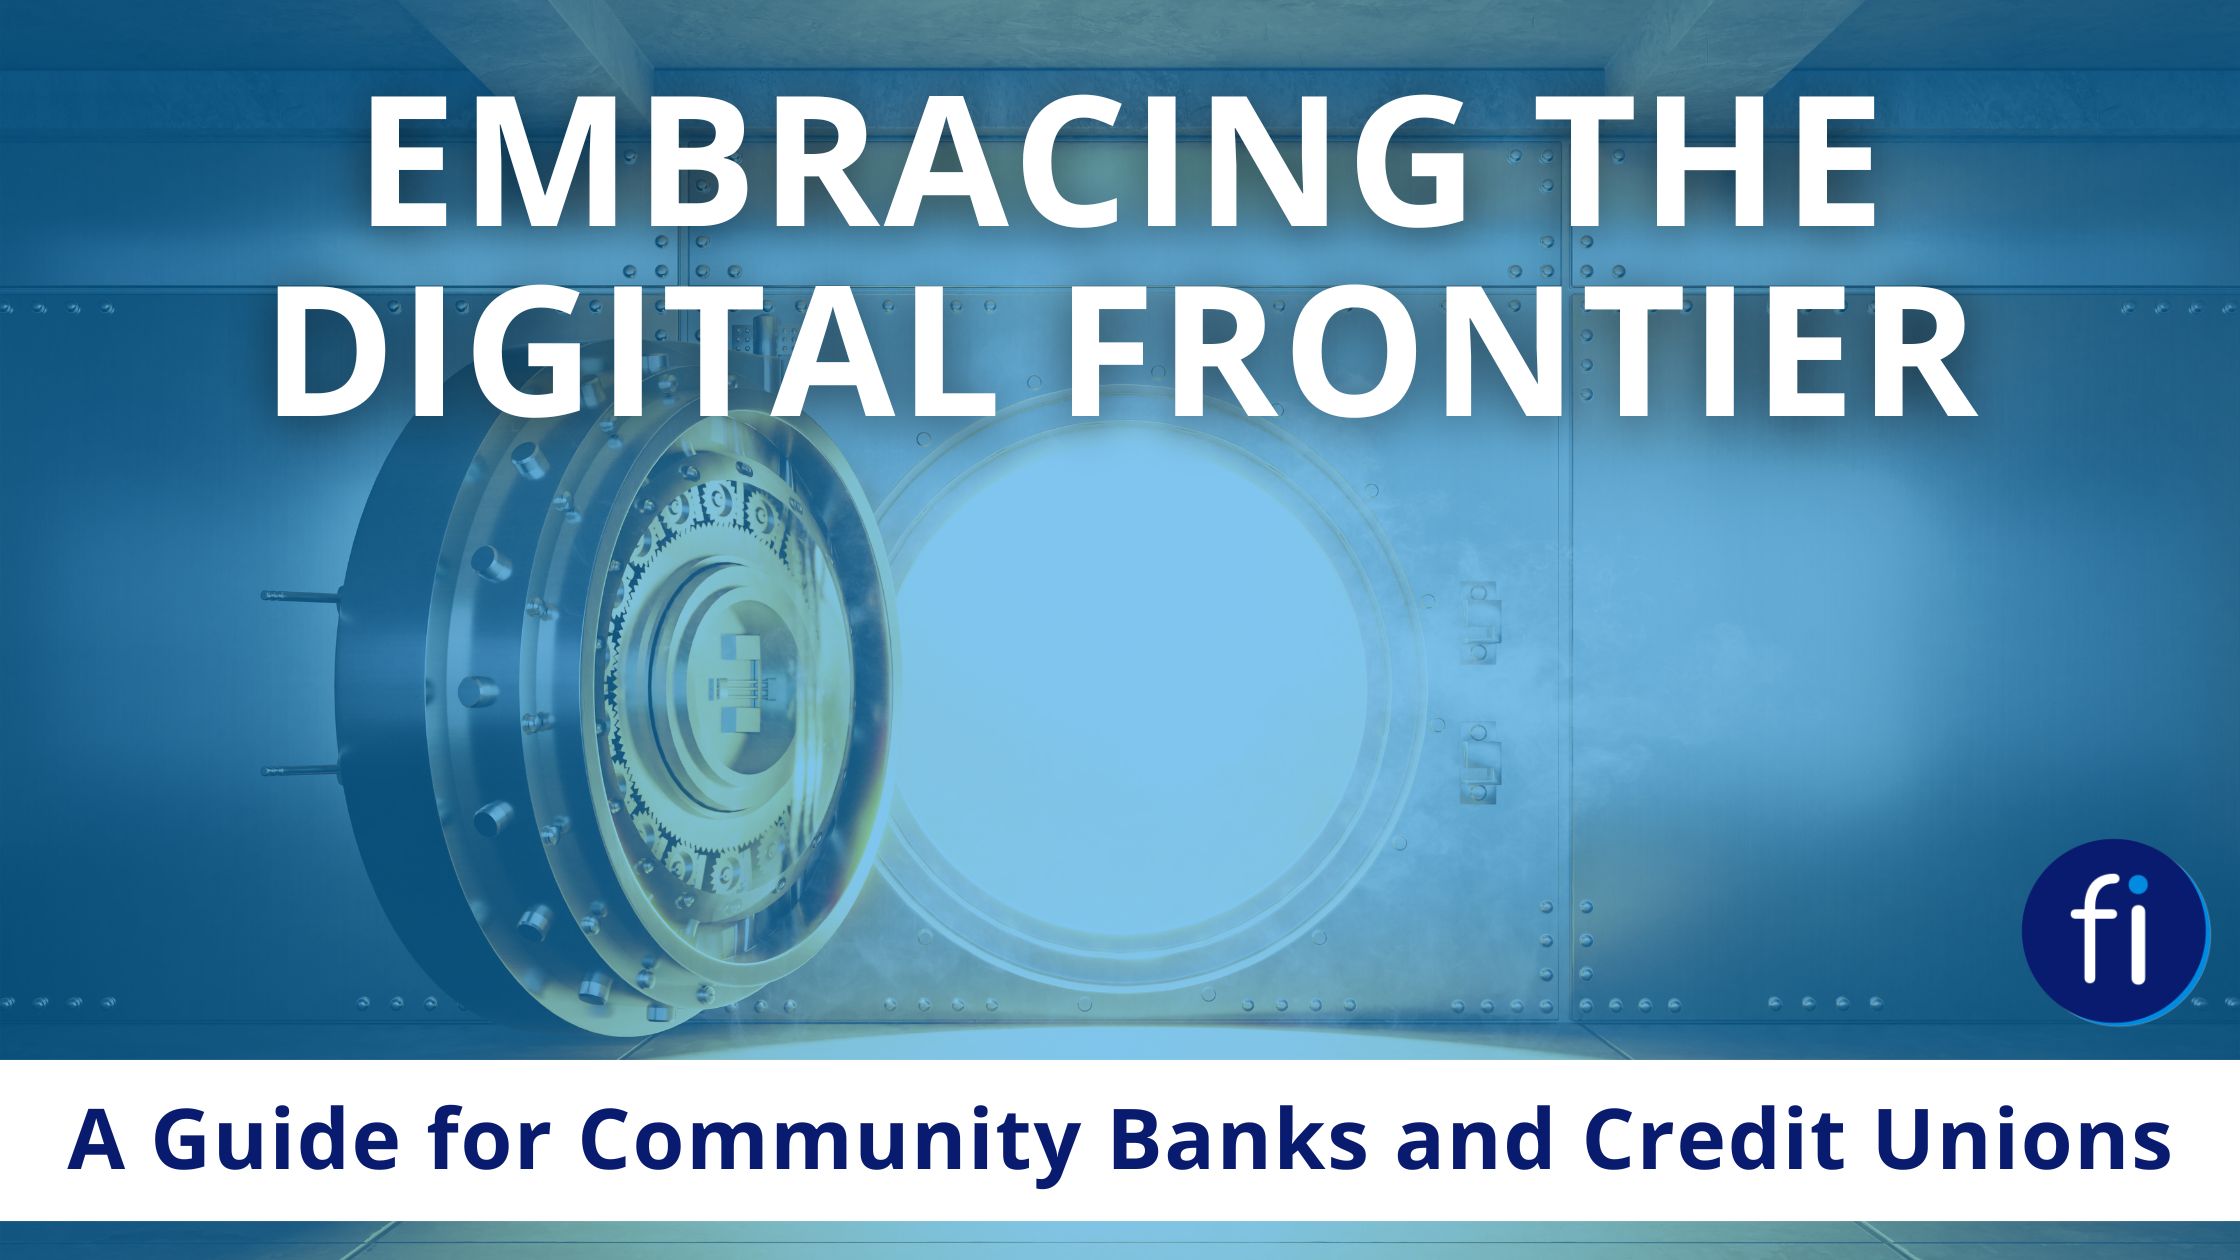 Embracing the Digital Frontier: A Guide for Community Banks and Credit Unions